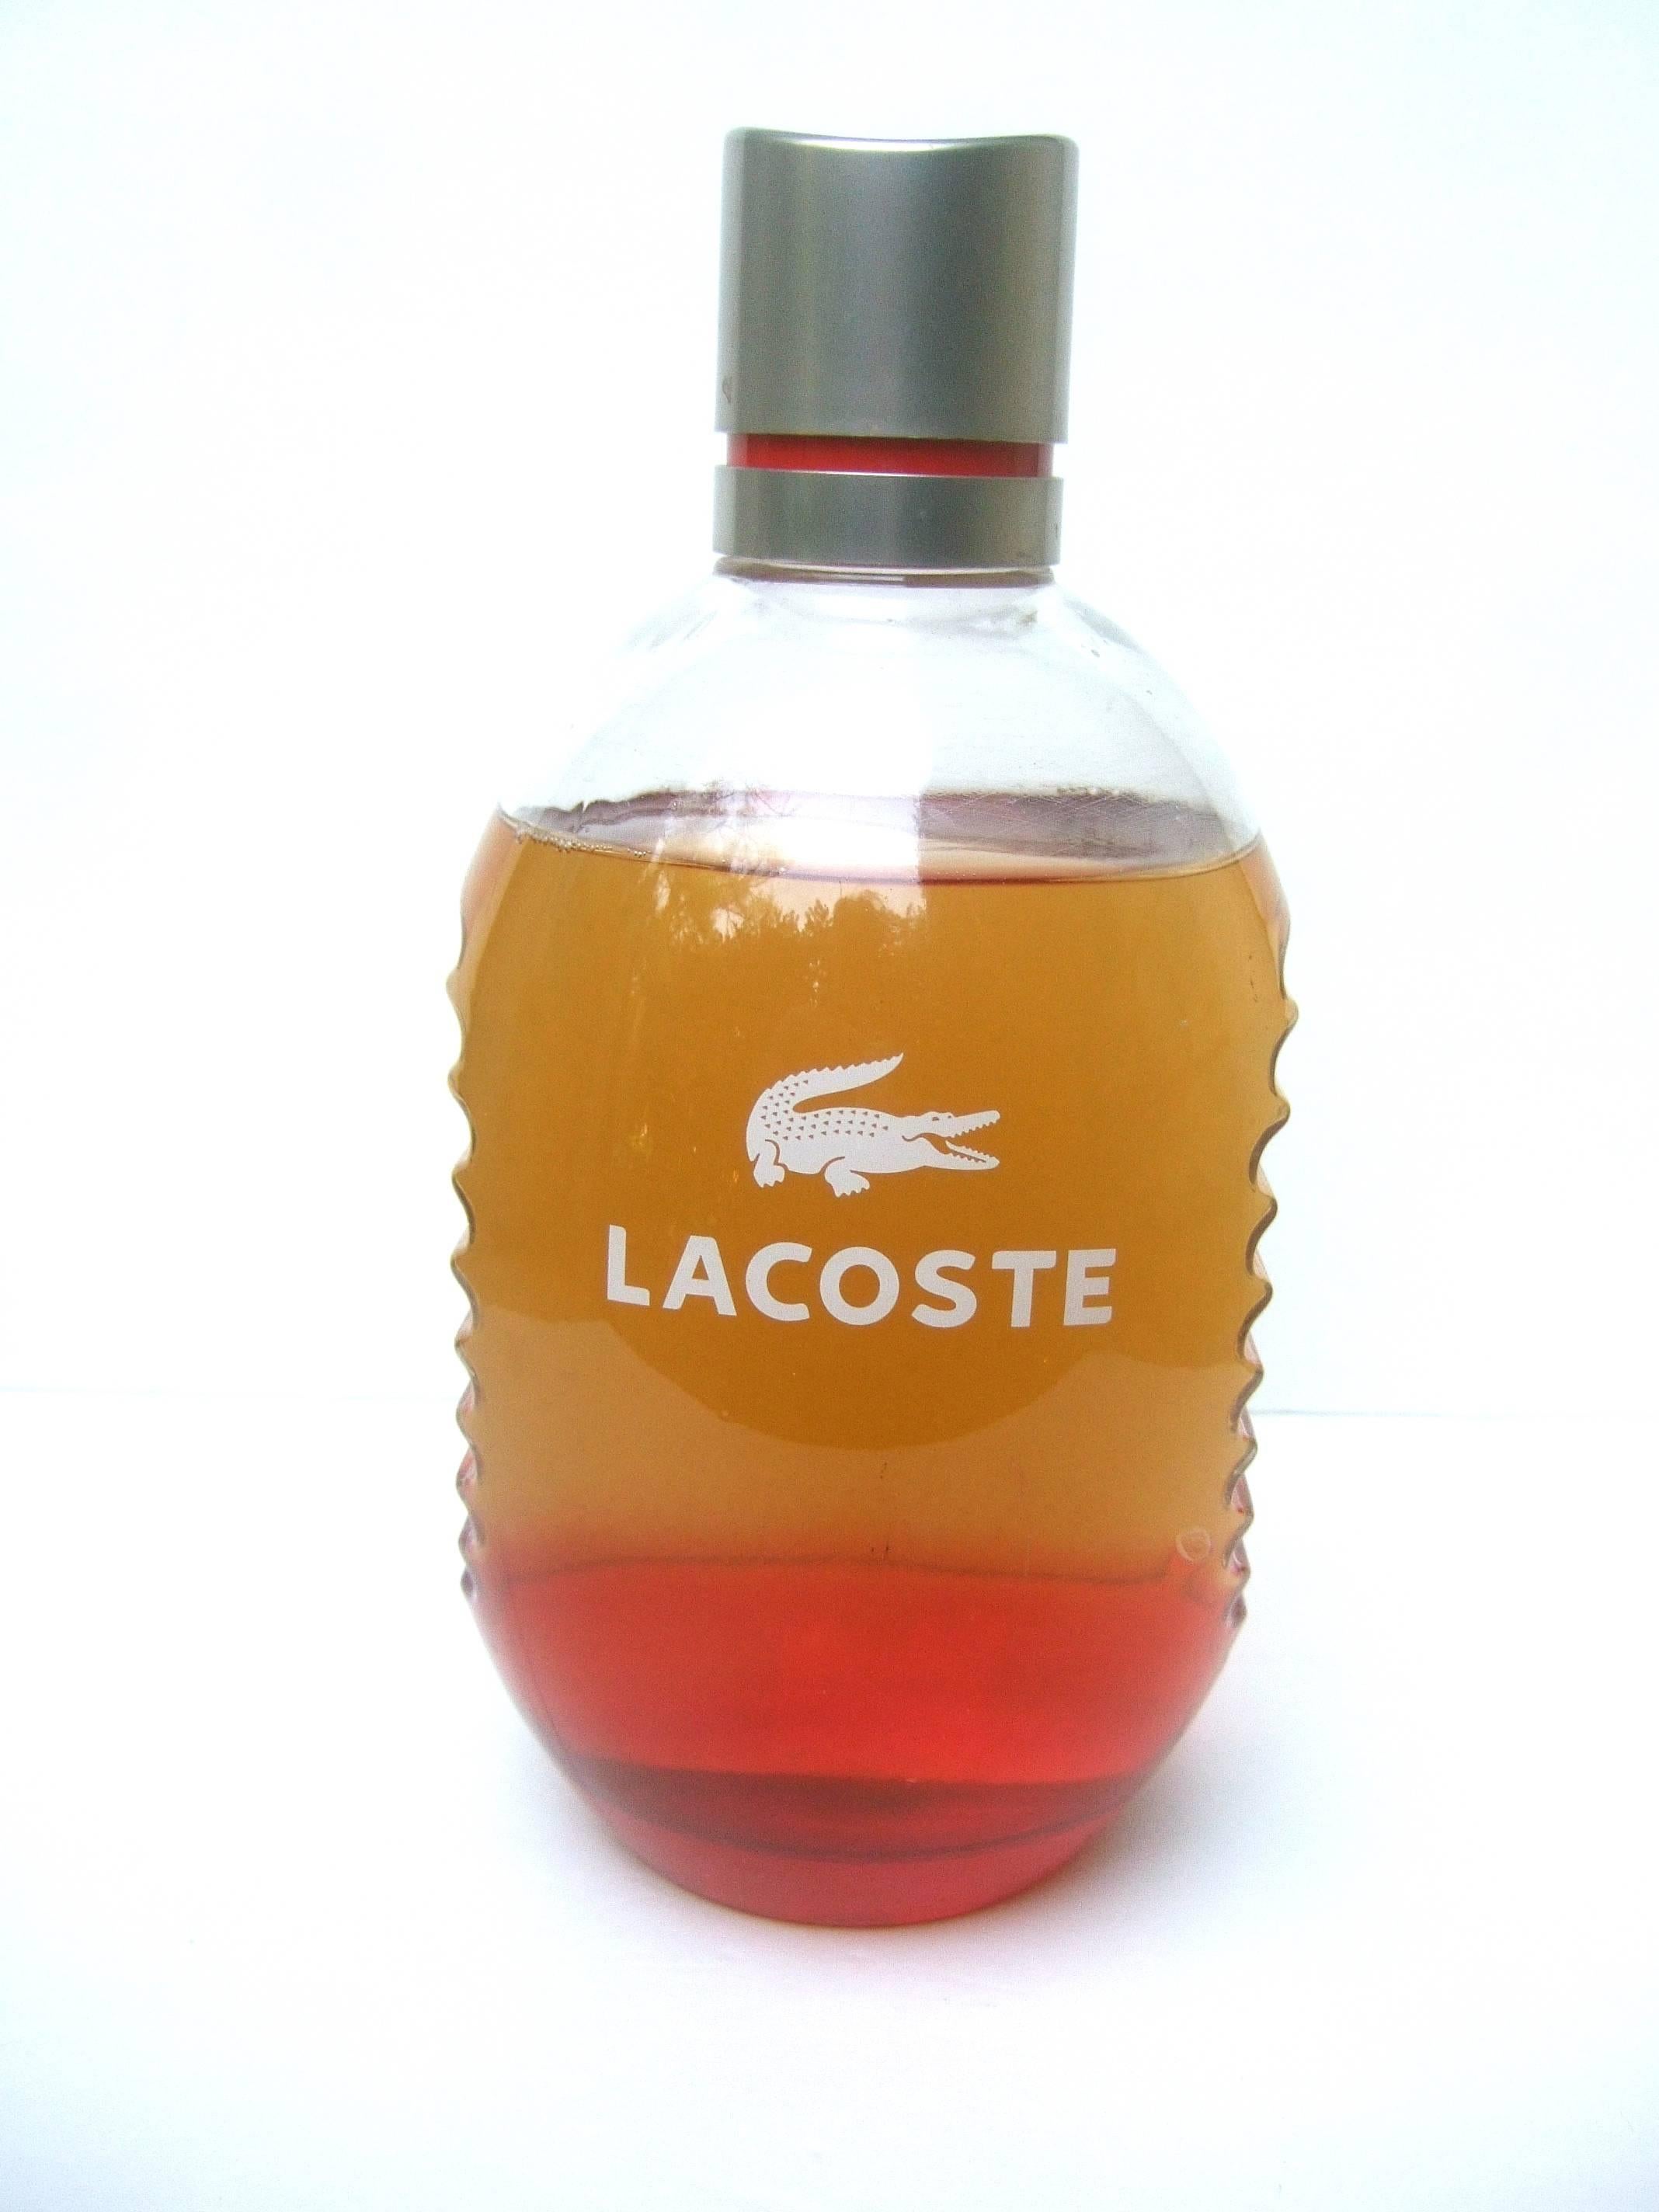 Lacoste huge glass fragrance factice display bottle
The large scale display dummy bottle is filled
with colored water

The glass bottle has Lacoste's white stenciled
name and alligator logo on the front. The sides
of the glass display bottle